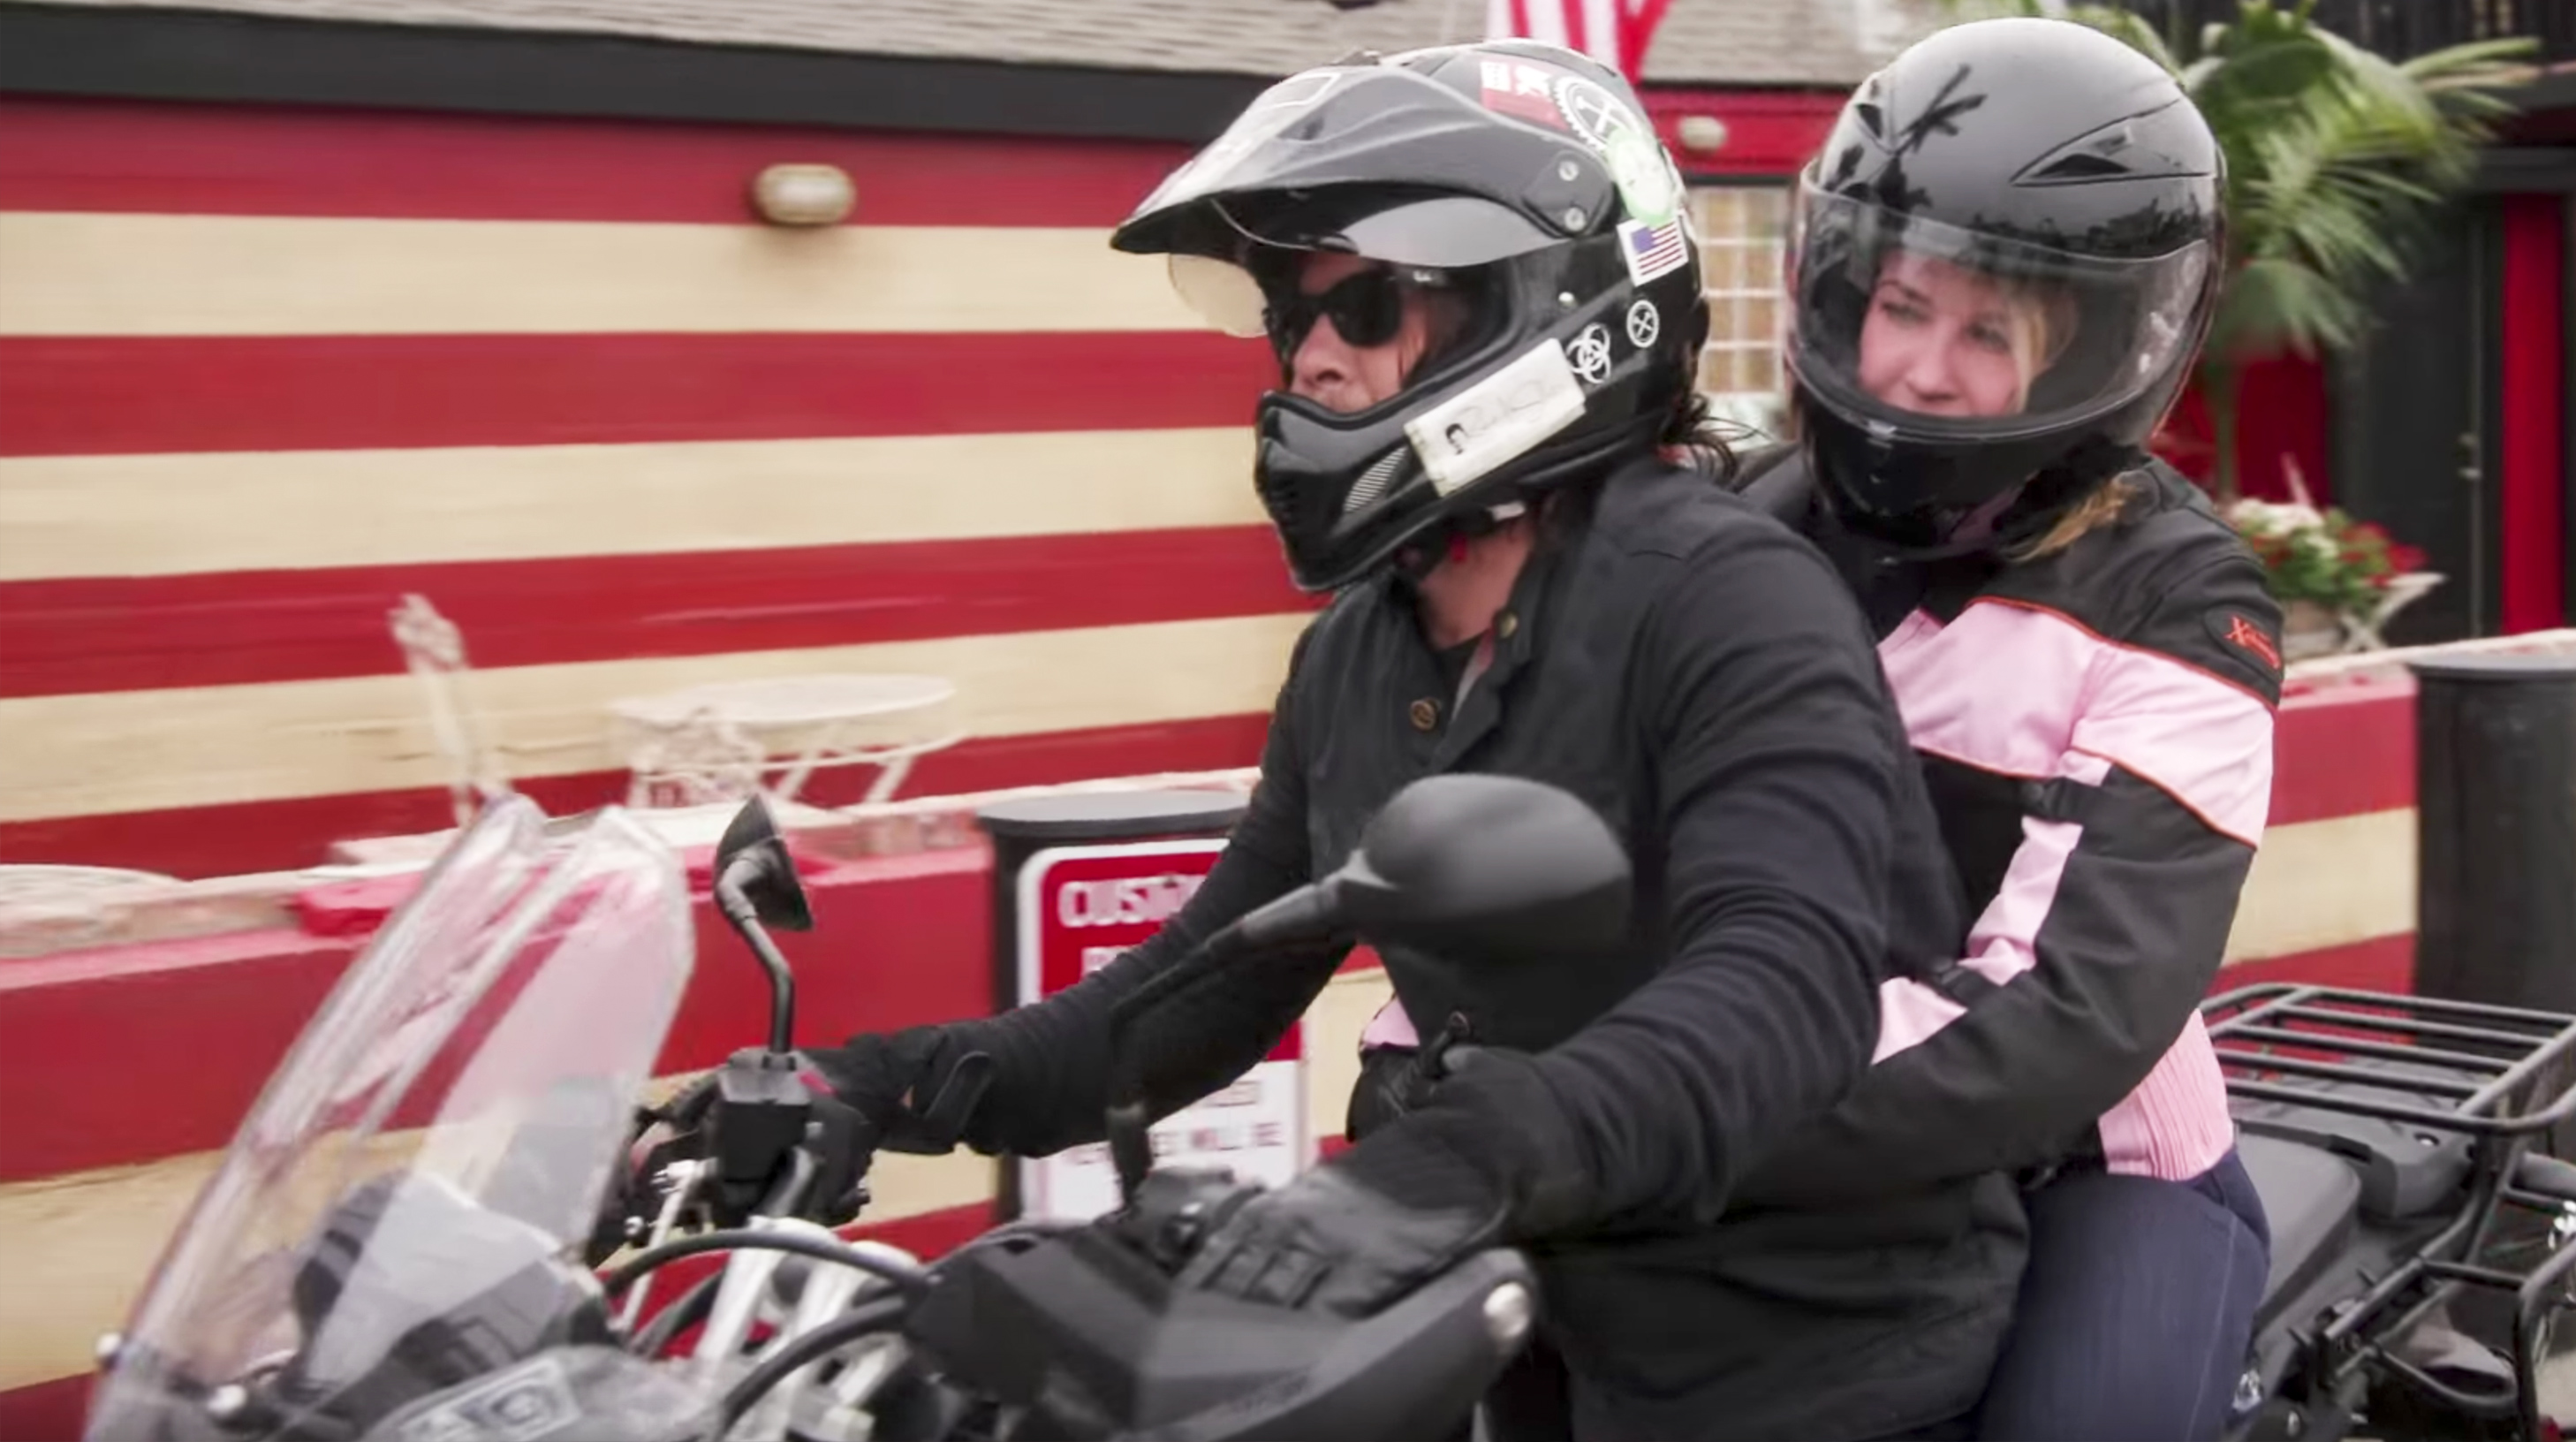 Chelsea Handler Rides With Norman Reedus On Her Show